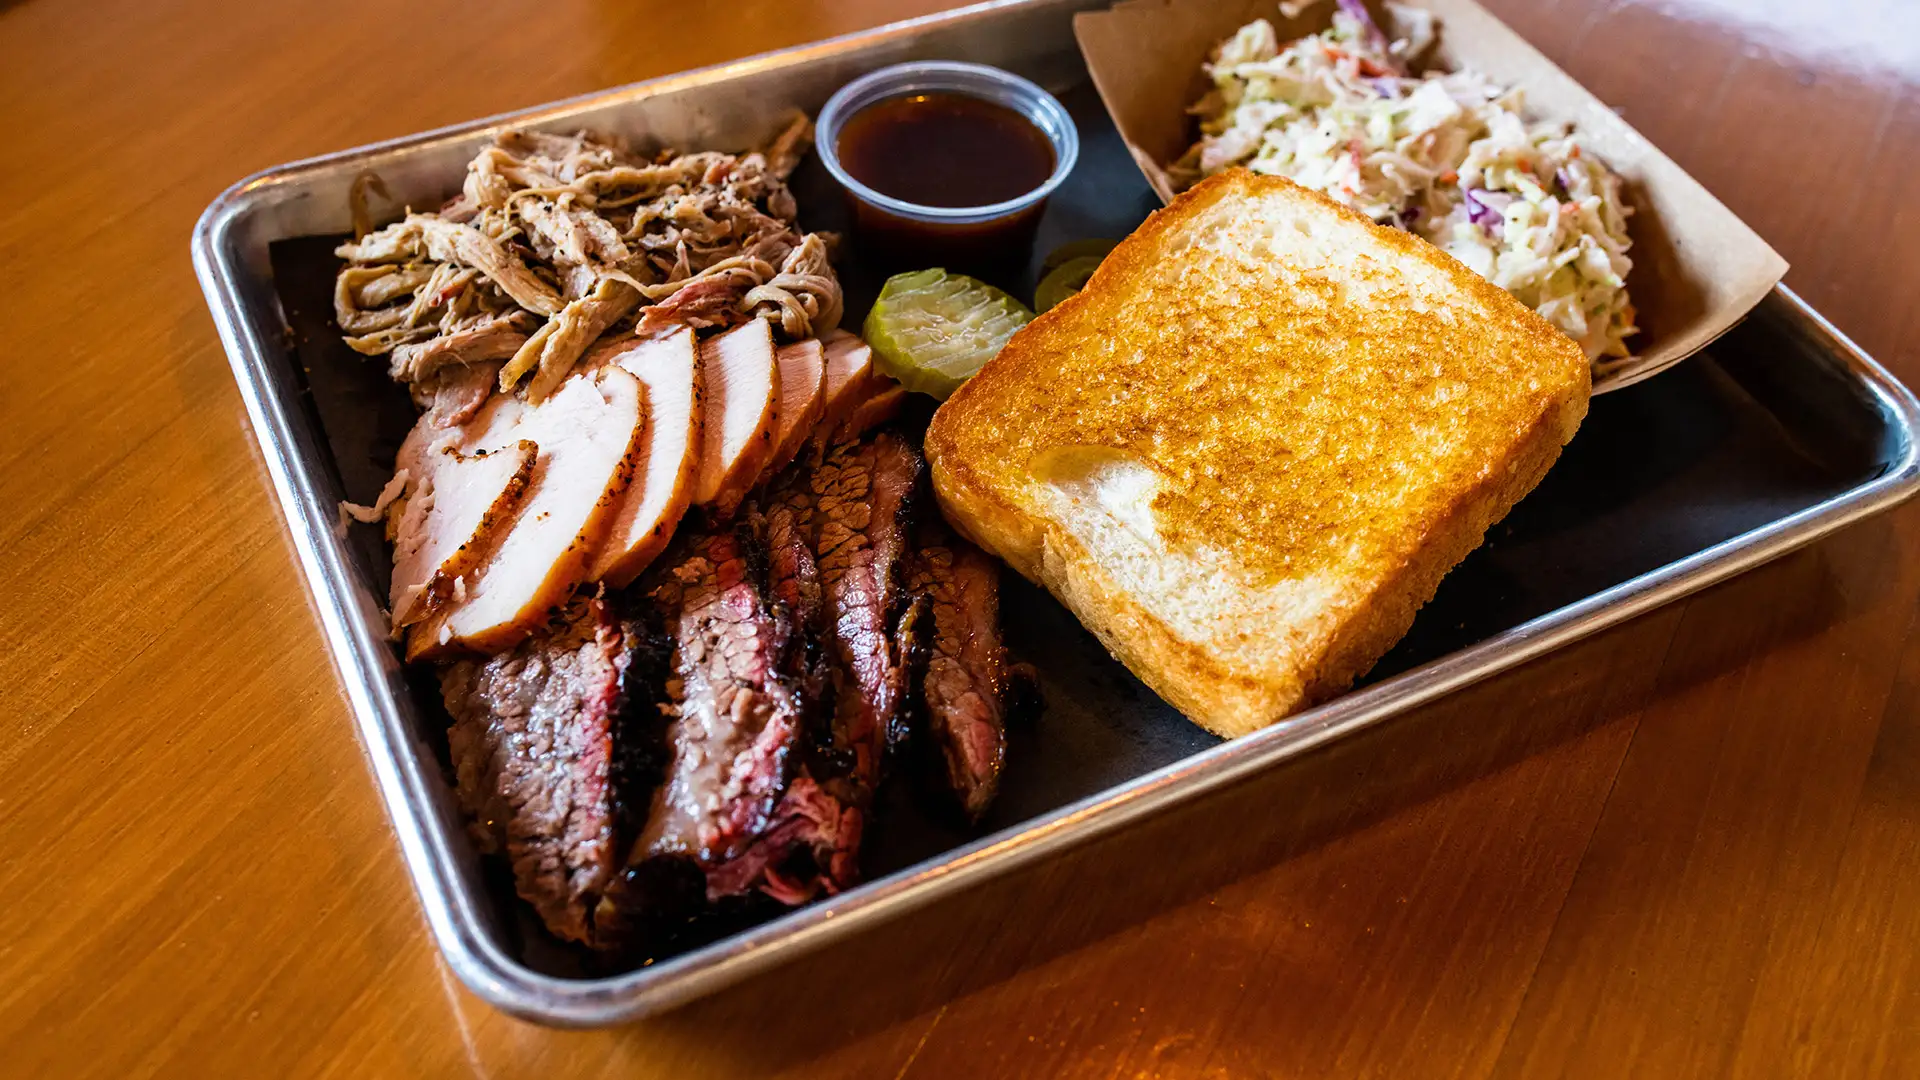 Plate with pulled pork, sliced turkey, sliced brisket with a side of coleslaw and toast